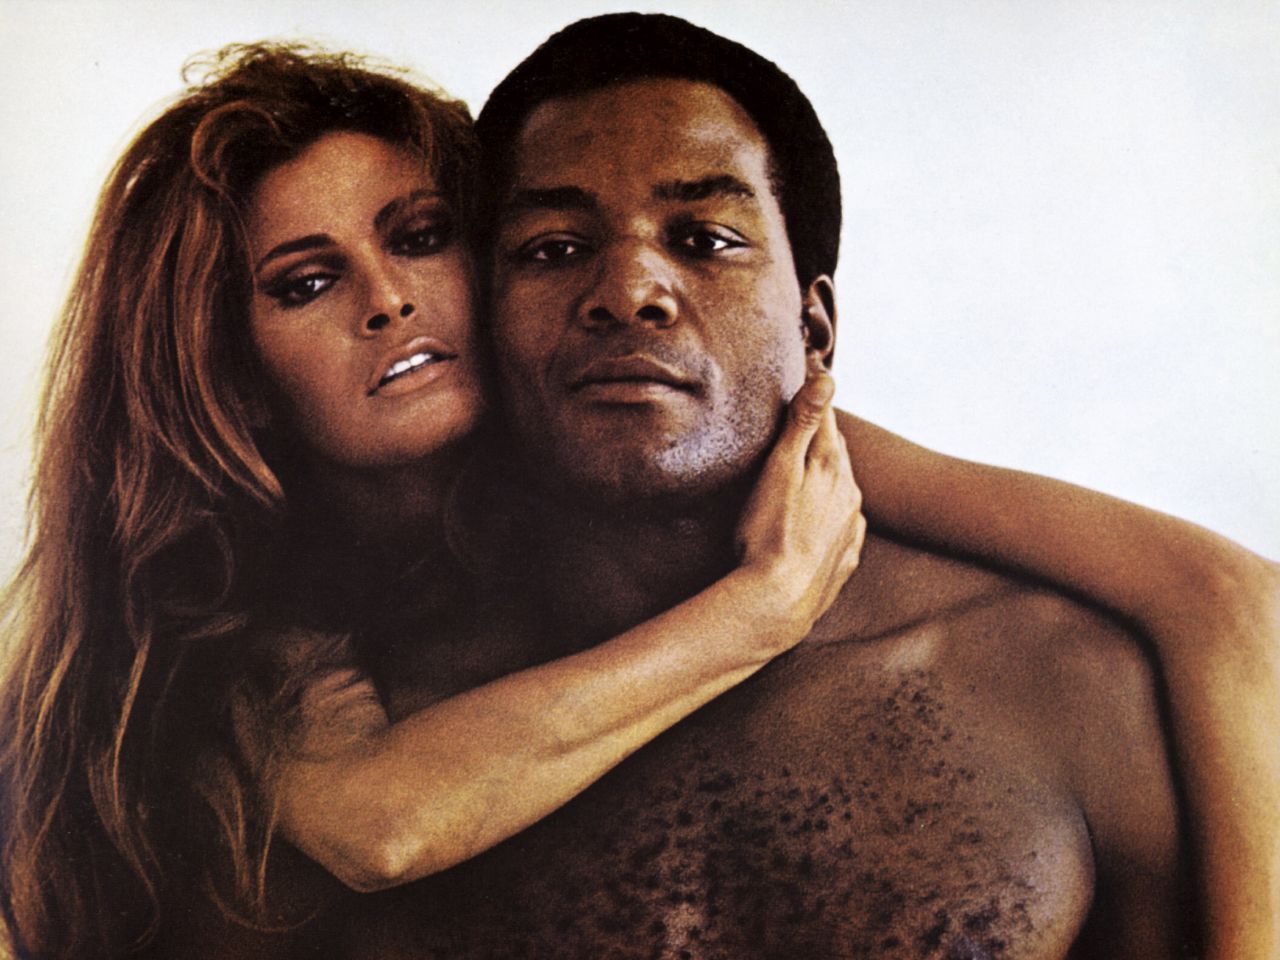 Brown co-starred with Raquel Welch in "100 Rifles," which was one of the first major studio films to feature an interracial love scene.